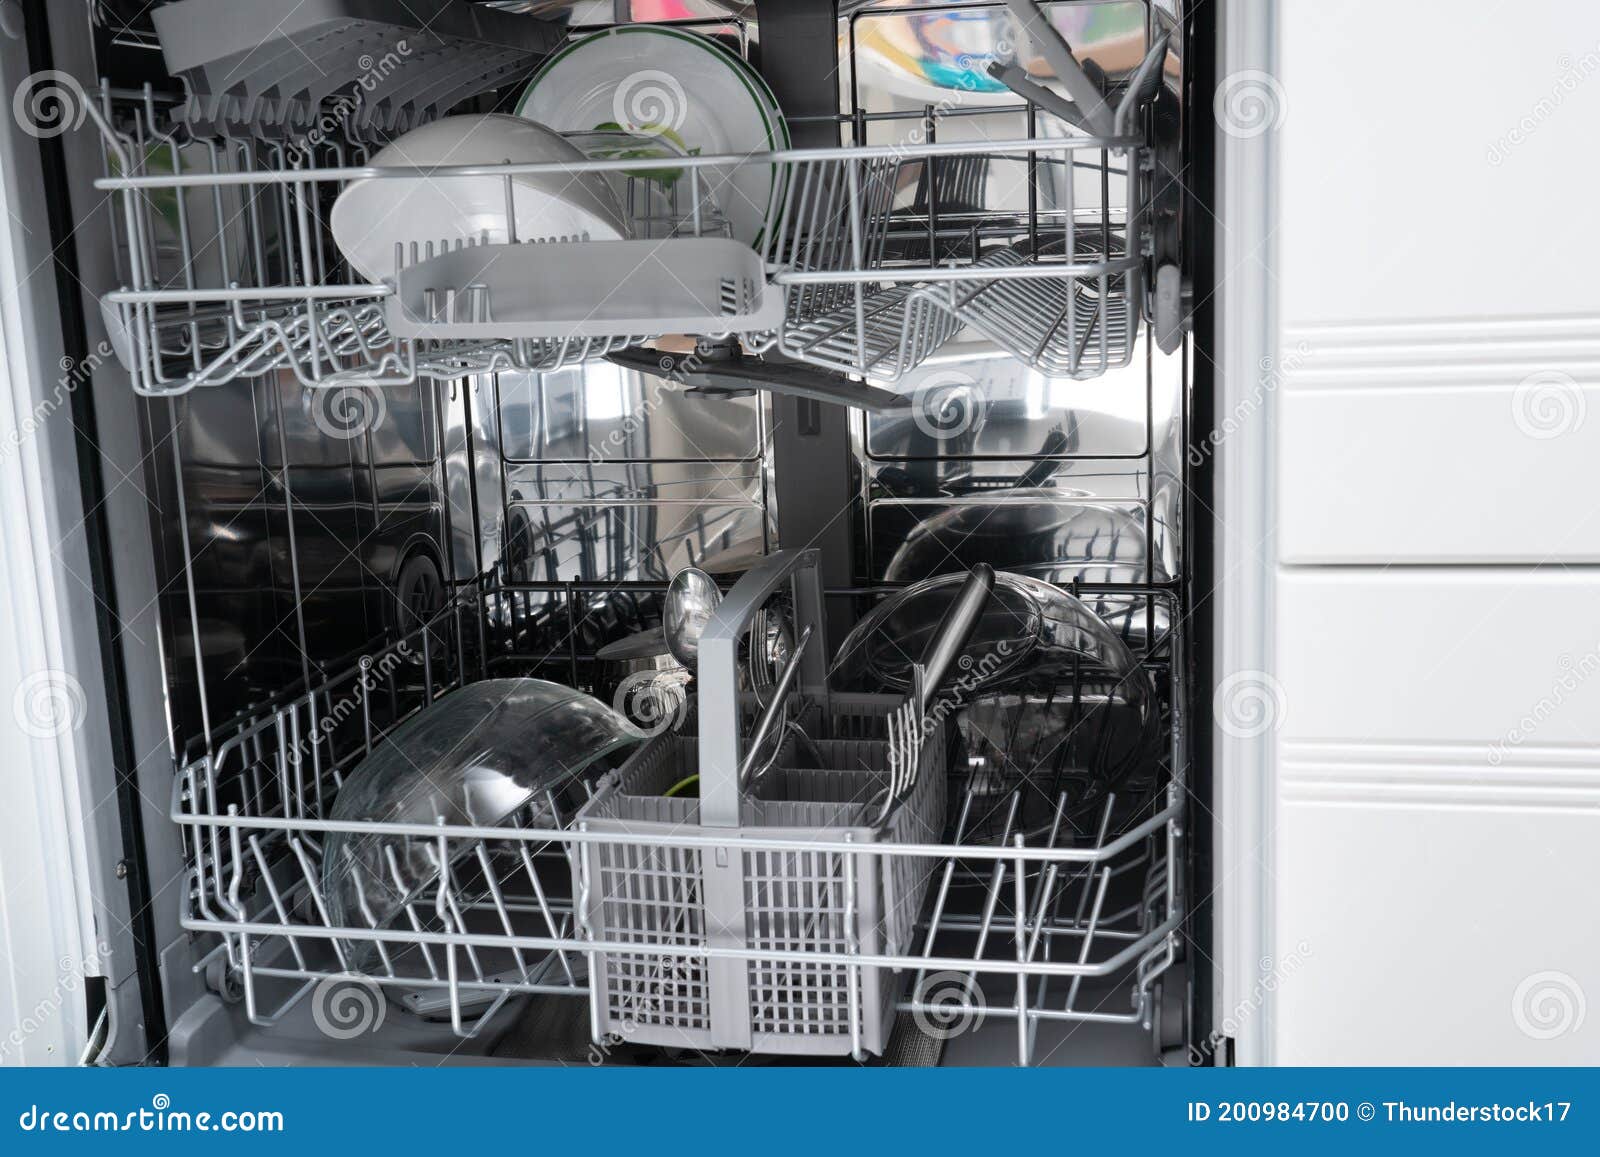 loaded dishwashing as timesaving house appliance concept